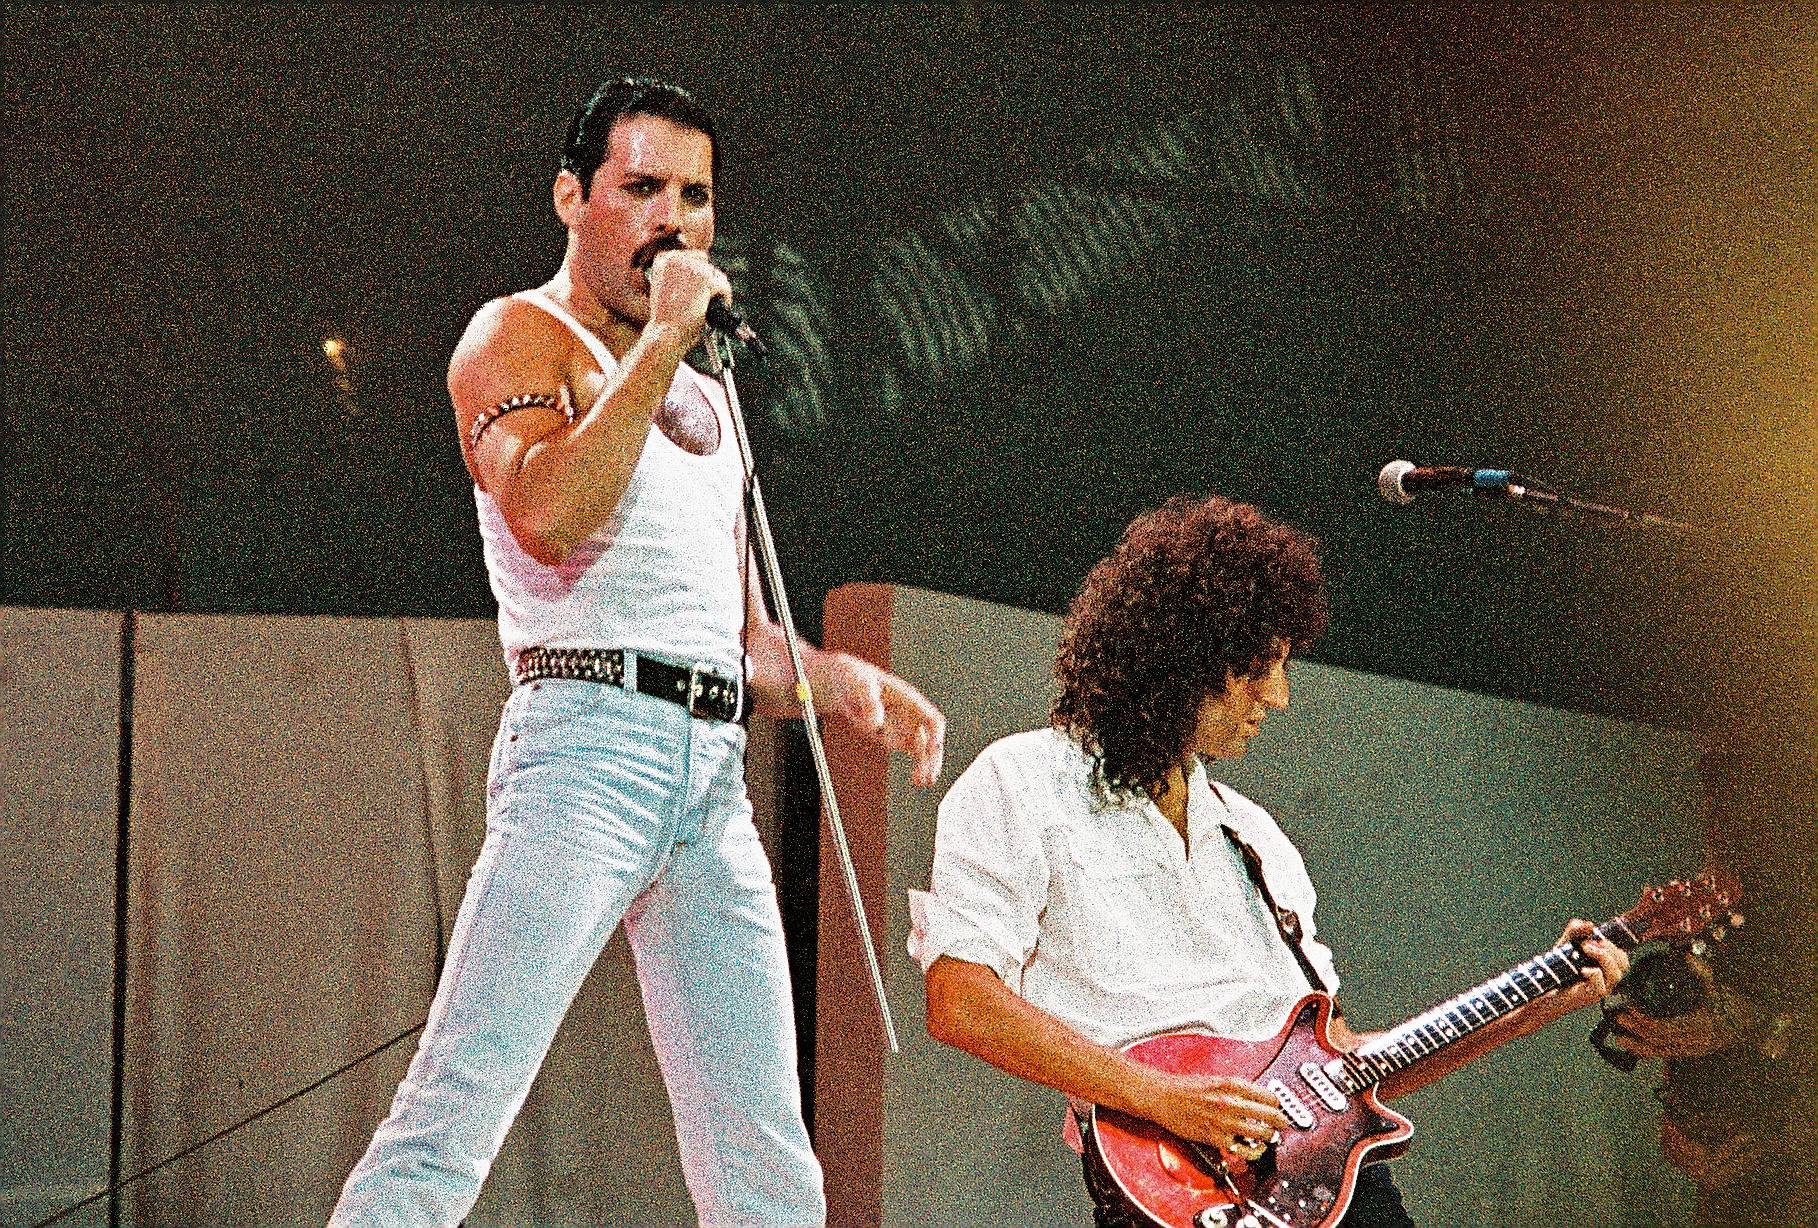 Freddie Mercury of Queen performs on stage at Live Aid on July 13th, 1985